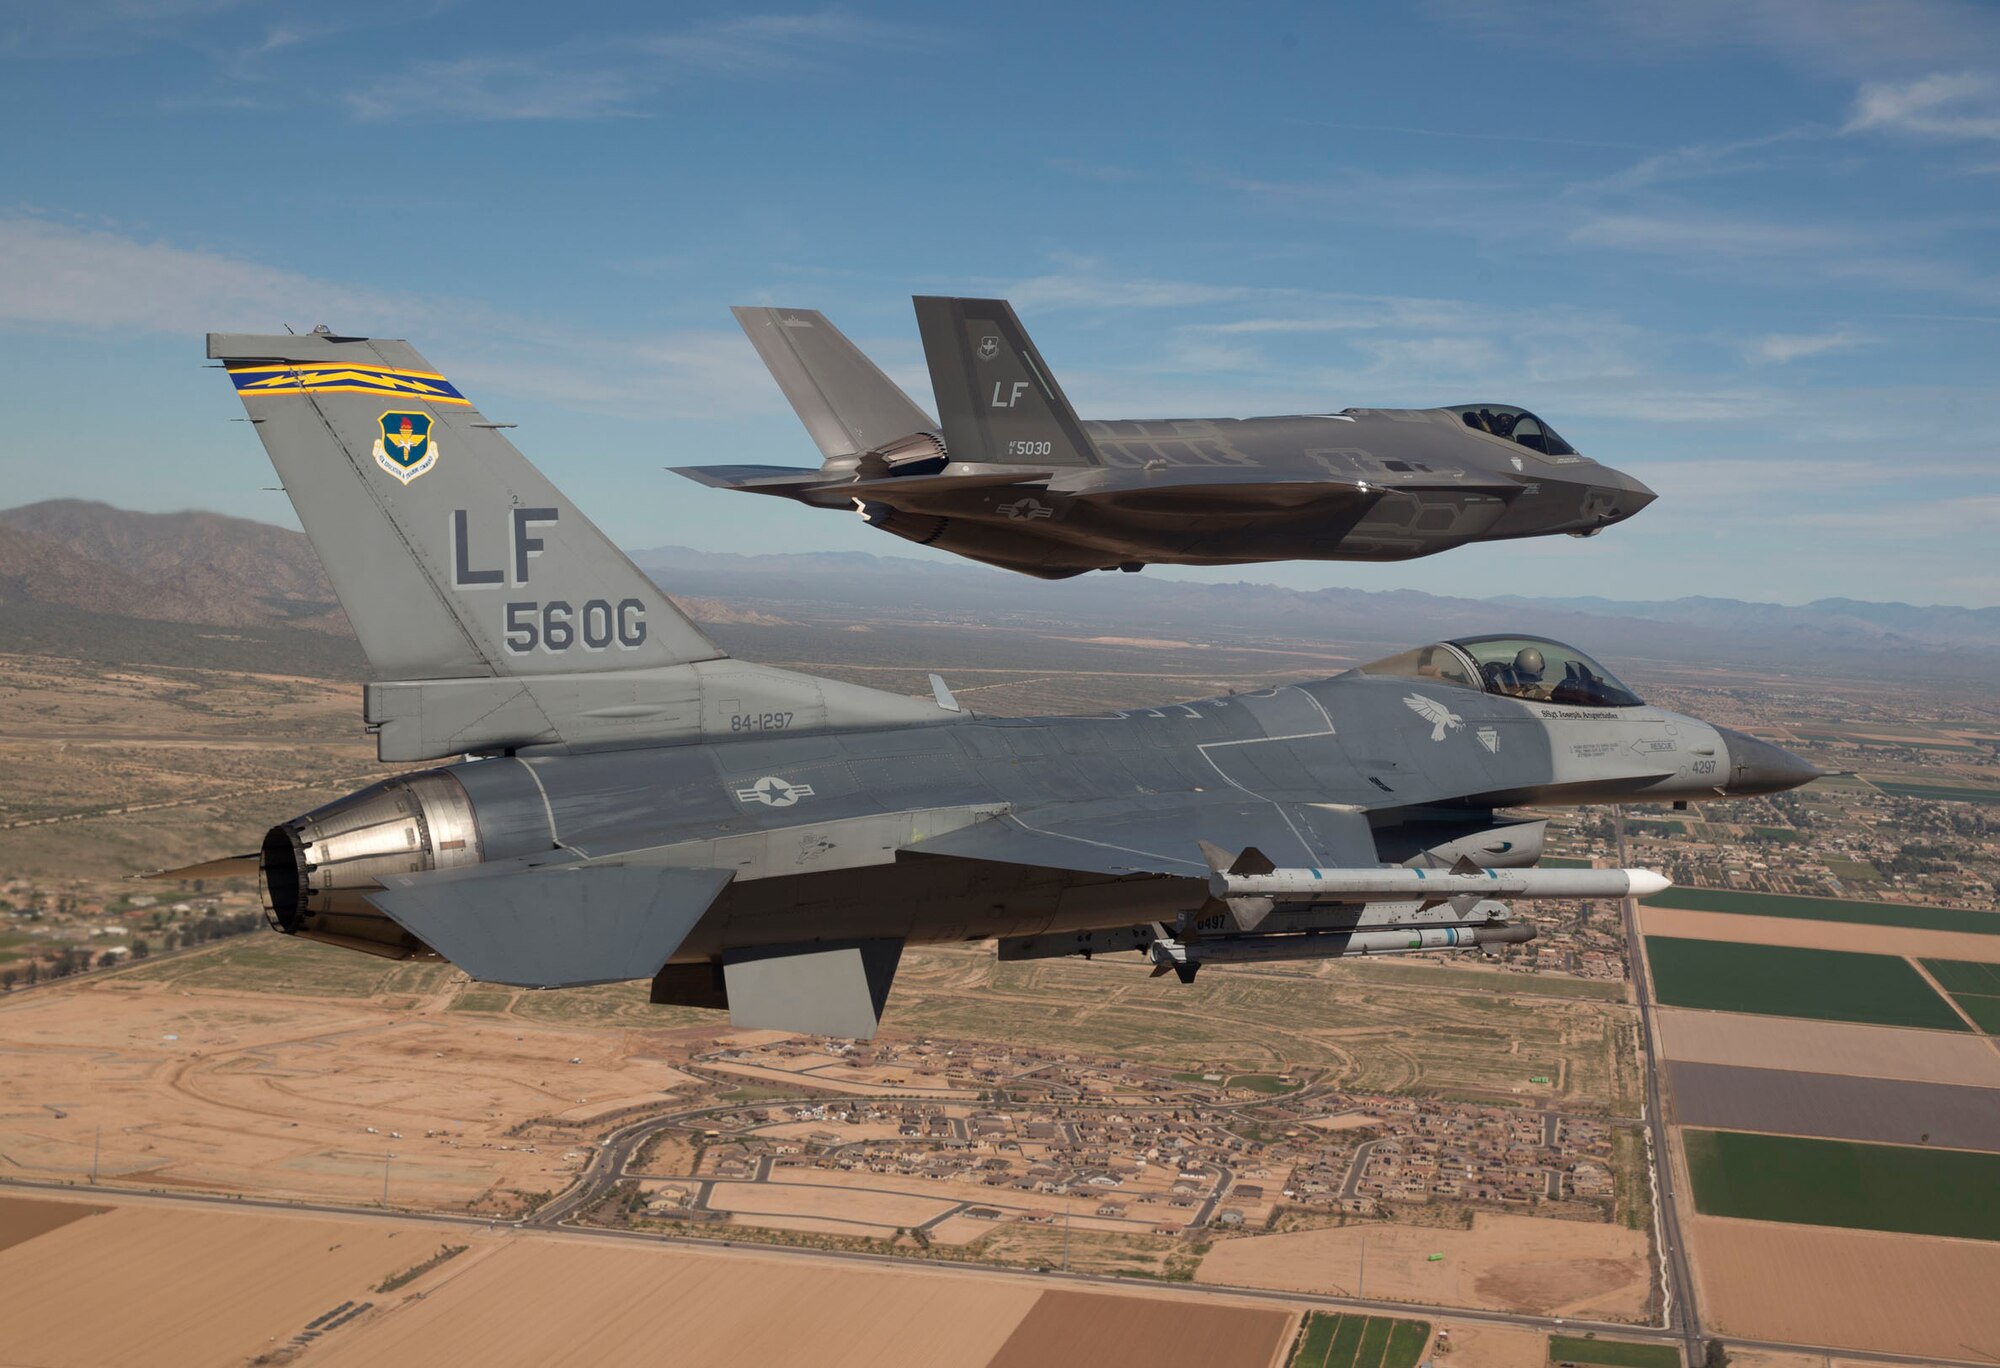 Maj. Justin Robinson, 61st Fighter Squadron assistant director of operations, flies the 56th Operations Group flagship F-16 as he escorts Luke’s first F-35 to the base for its arrival on March 10. The F-35 was flown by Col. Roderick Cregier, an F-35 test pilot stationed at Edwards AFB, Calif. The jet is the first of 144 F-35s that will eventually be assigned to Luke. (U.S. Air Force photo/Jim Hazeltine) 